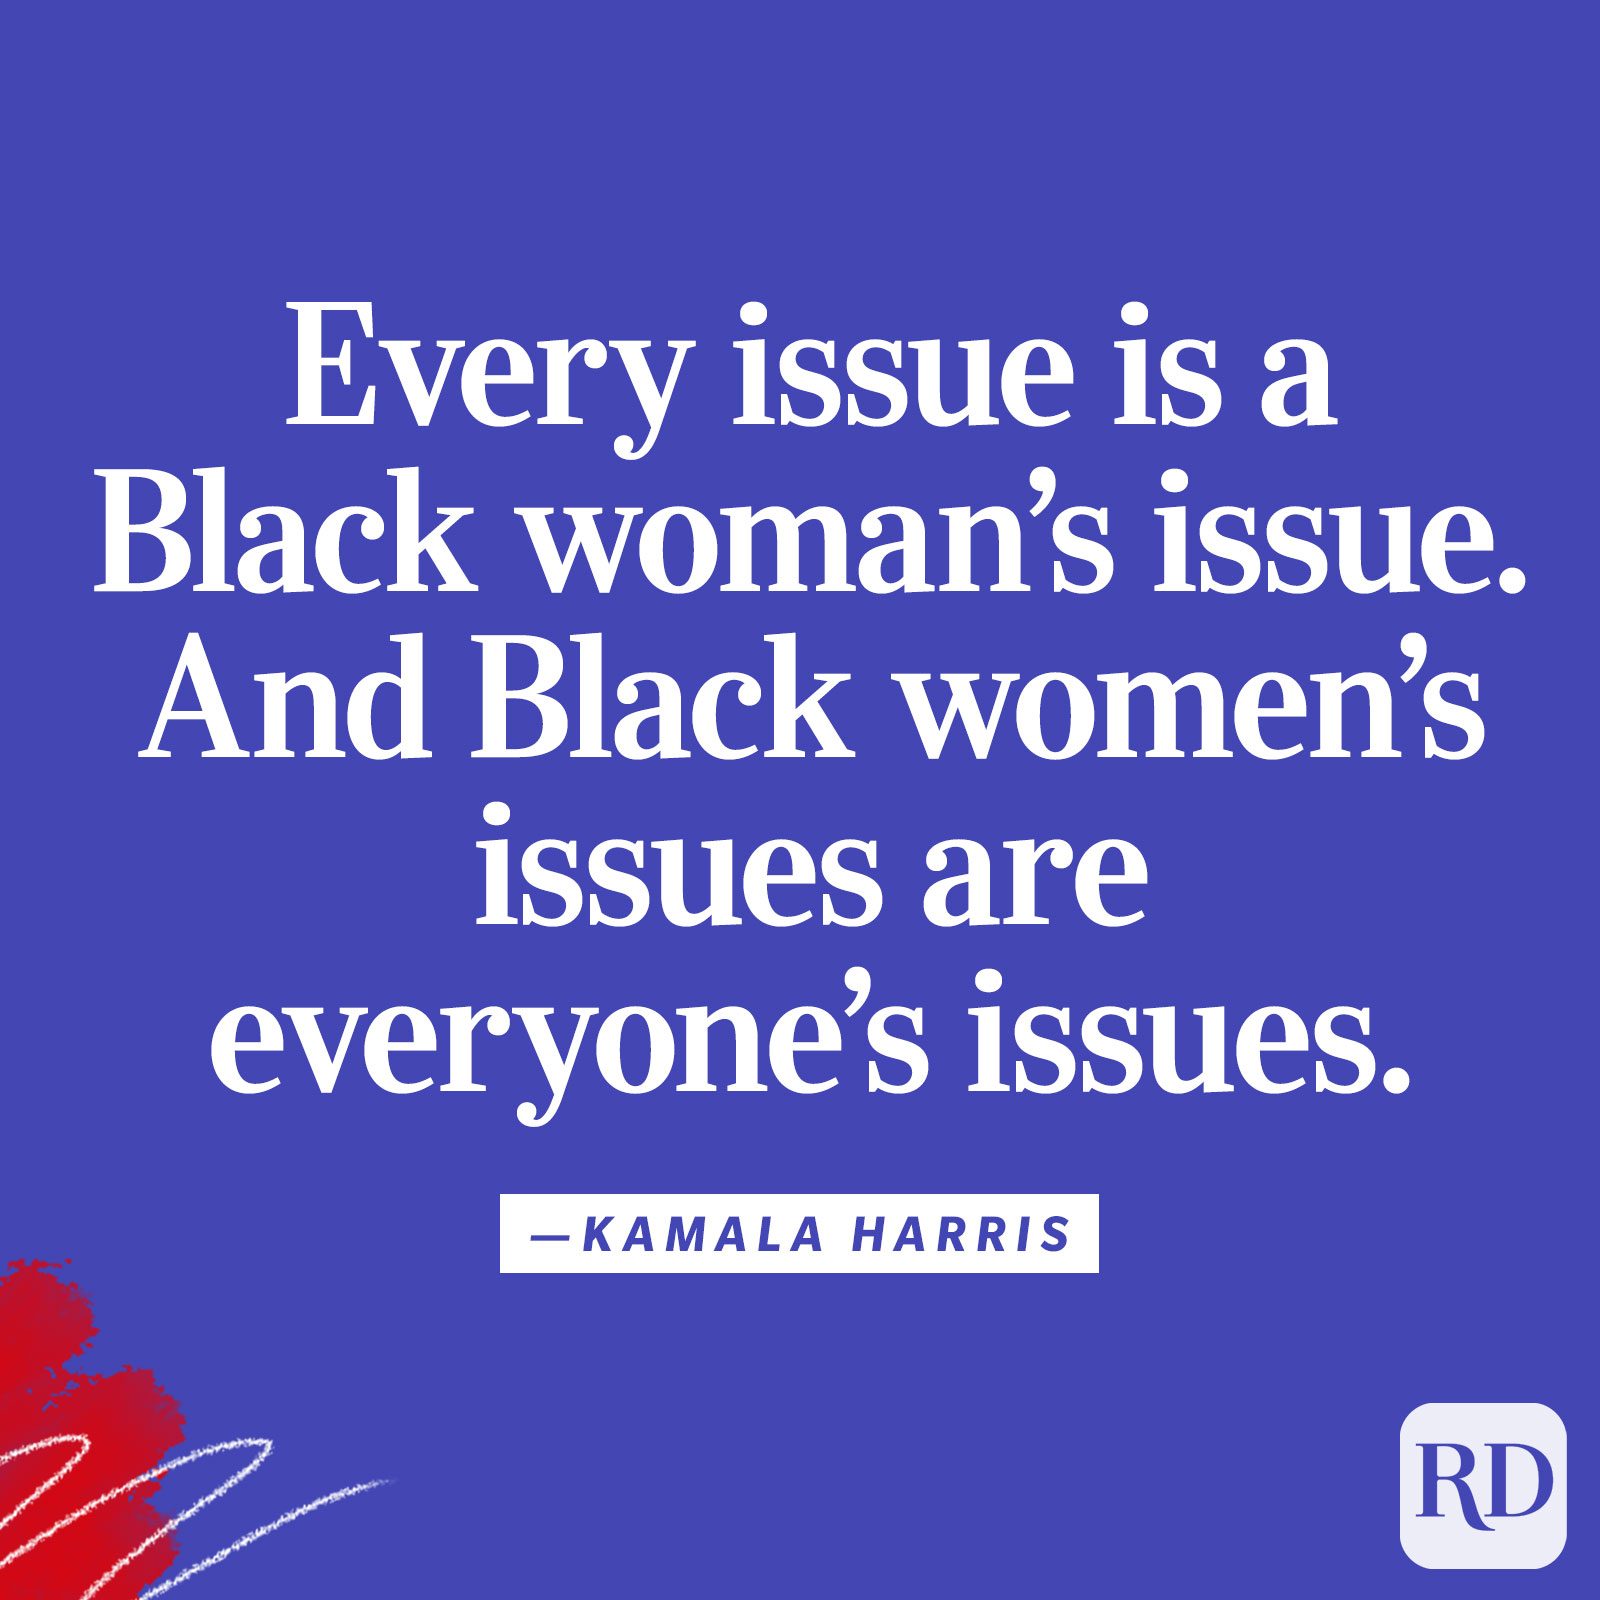 "Every issue is a Black woman's issue. And Black women's issues are everyone's issues."